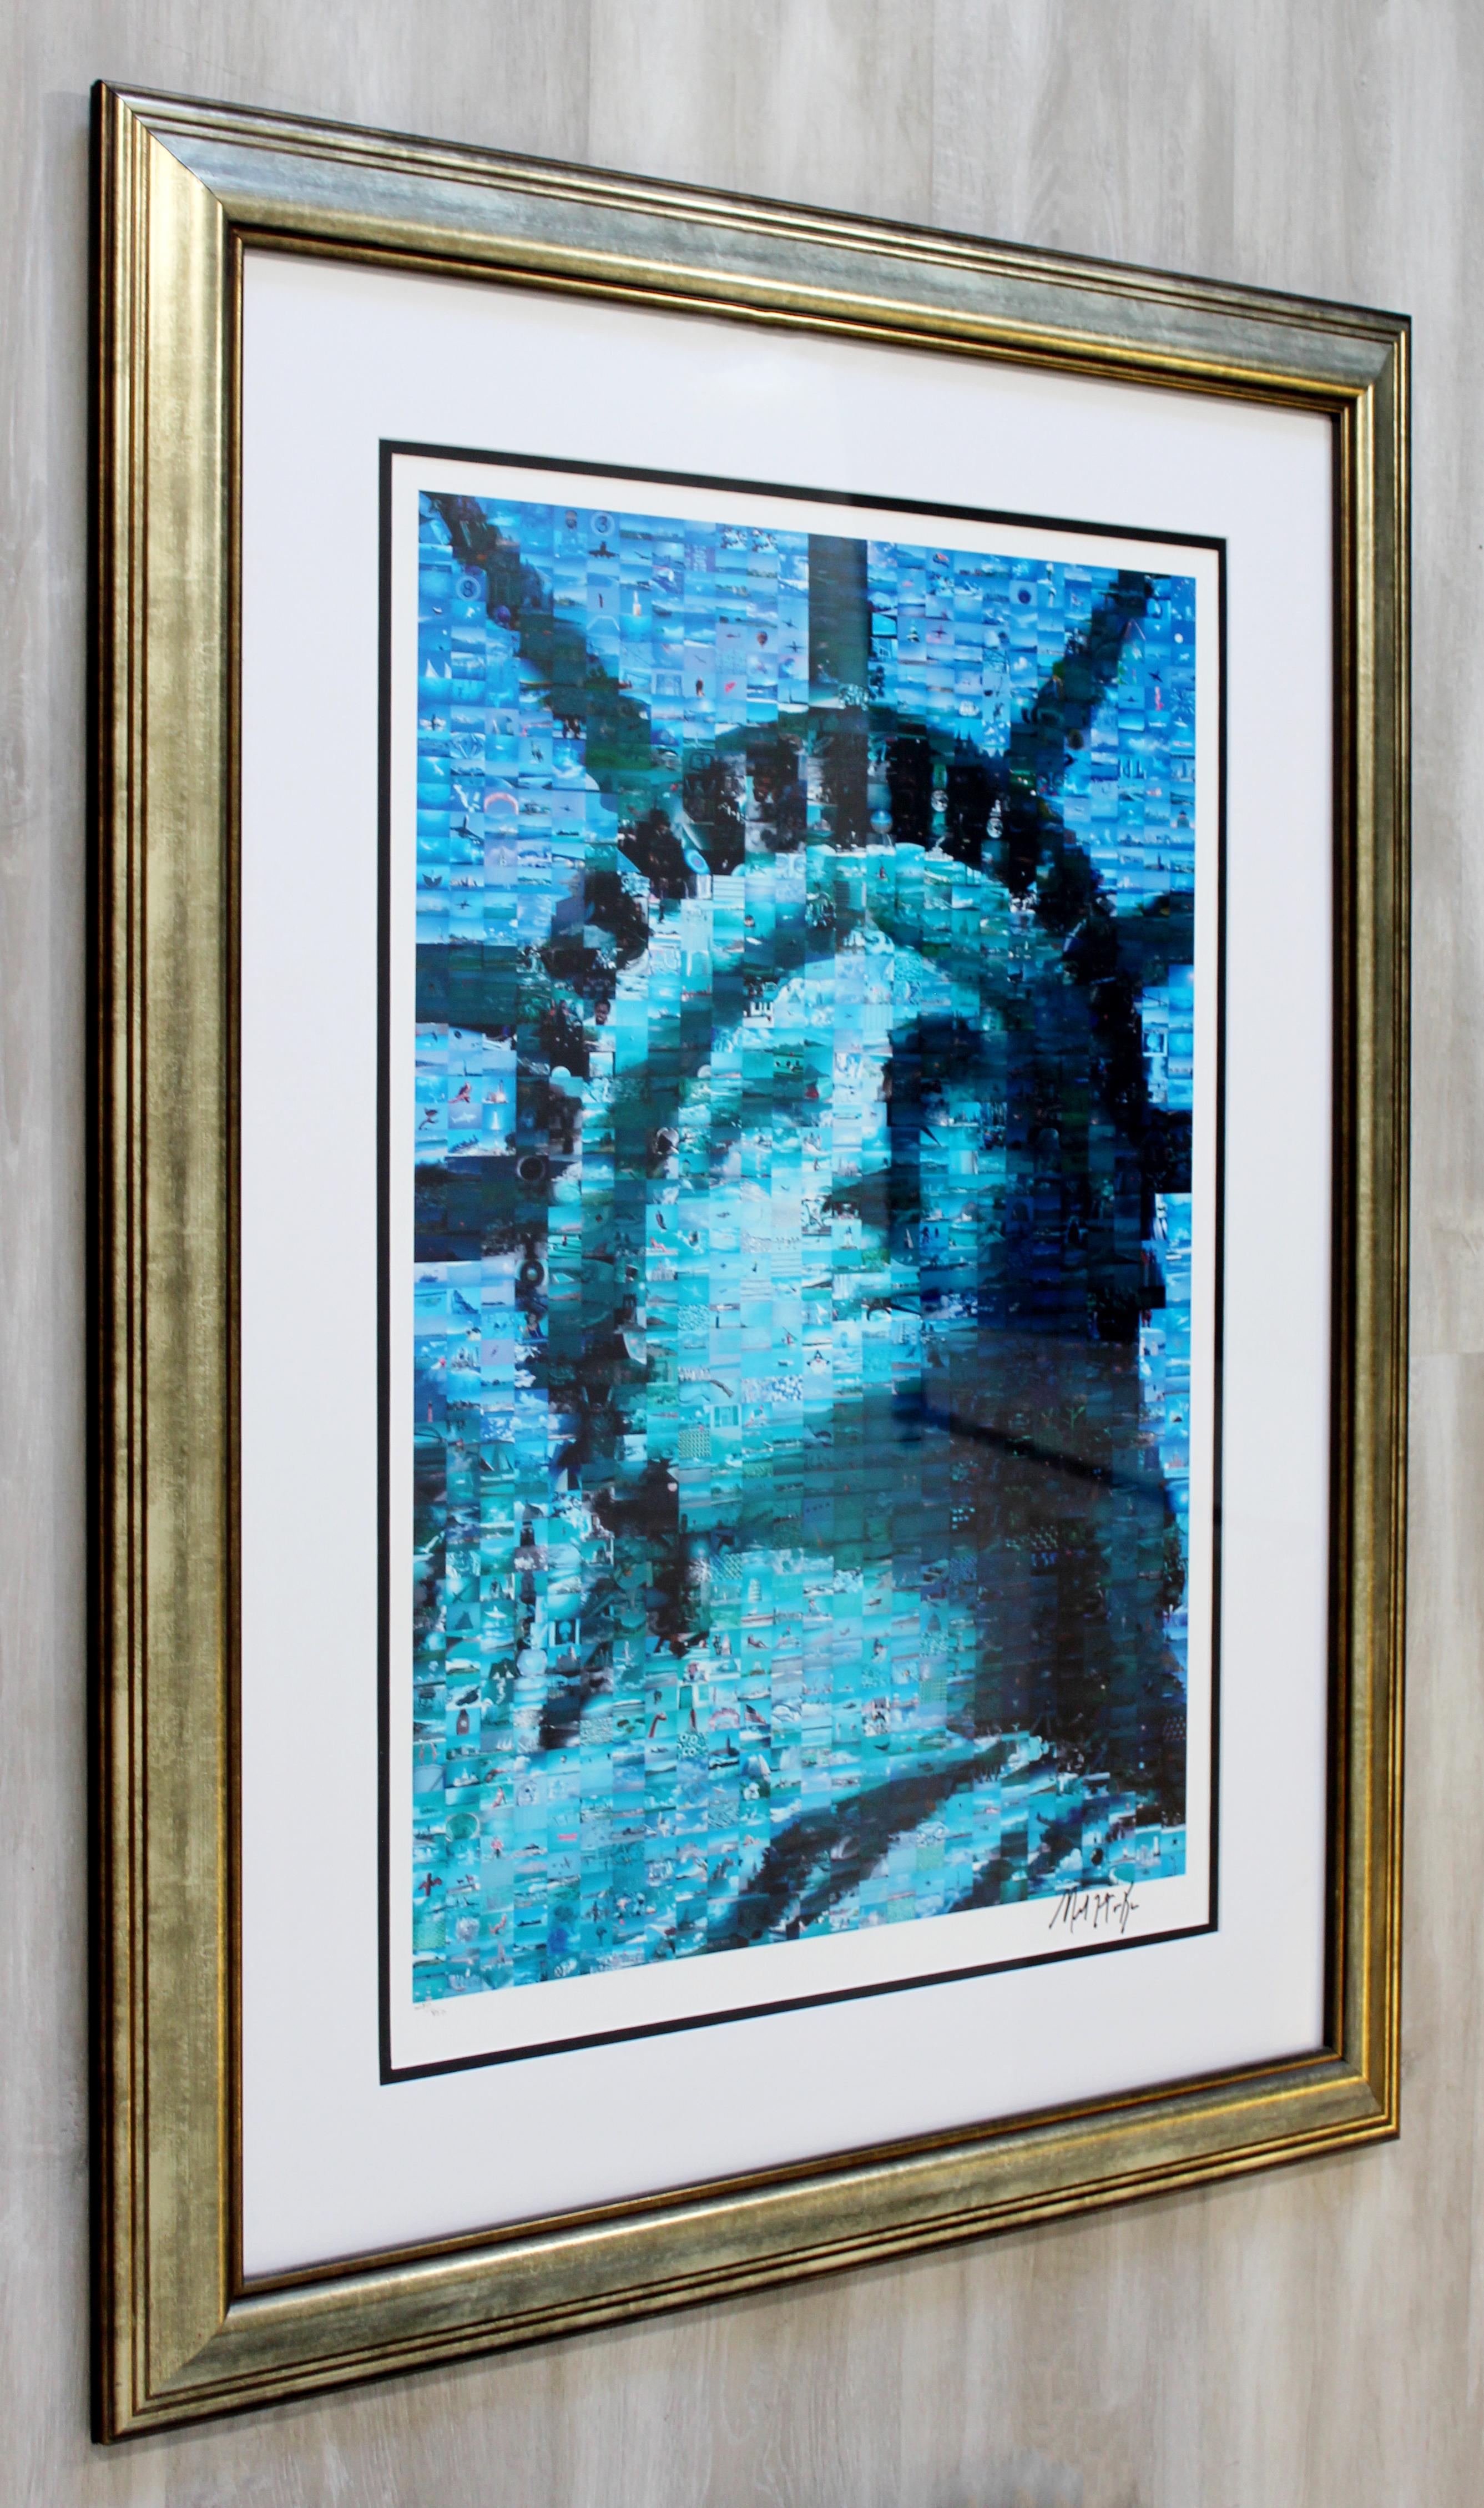 American Contemporary Framed Liberty Photo Mosaic Seriolithograph Signed Neil Farkas 2005